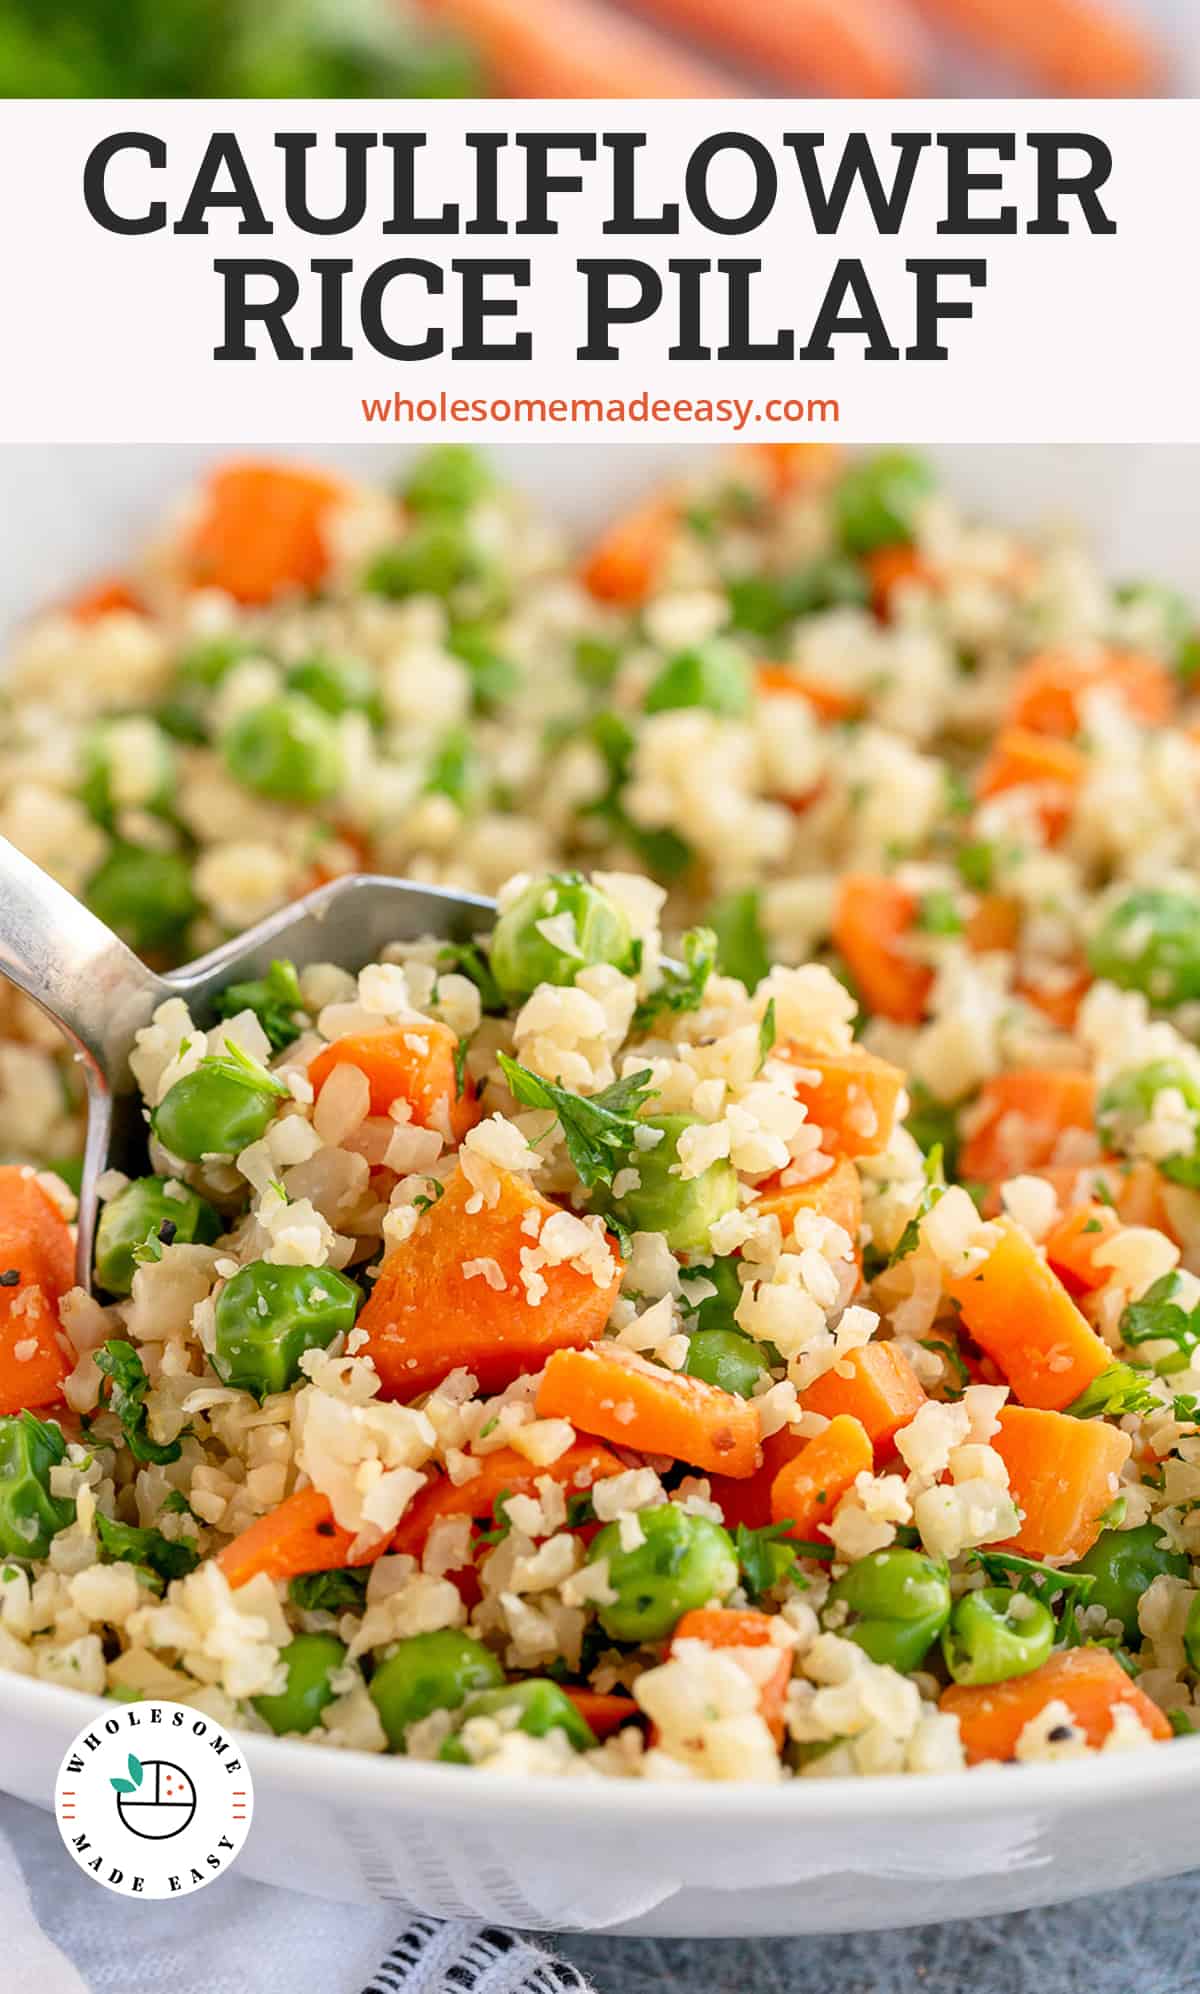 A close up of a spoon scooping Cauliflower Rice Pilaf with overlay text.